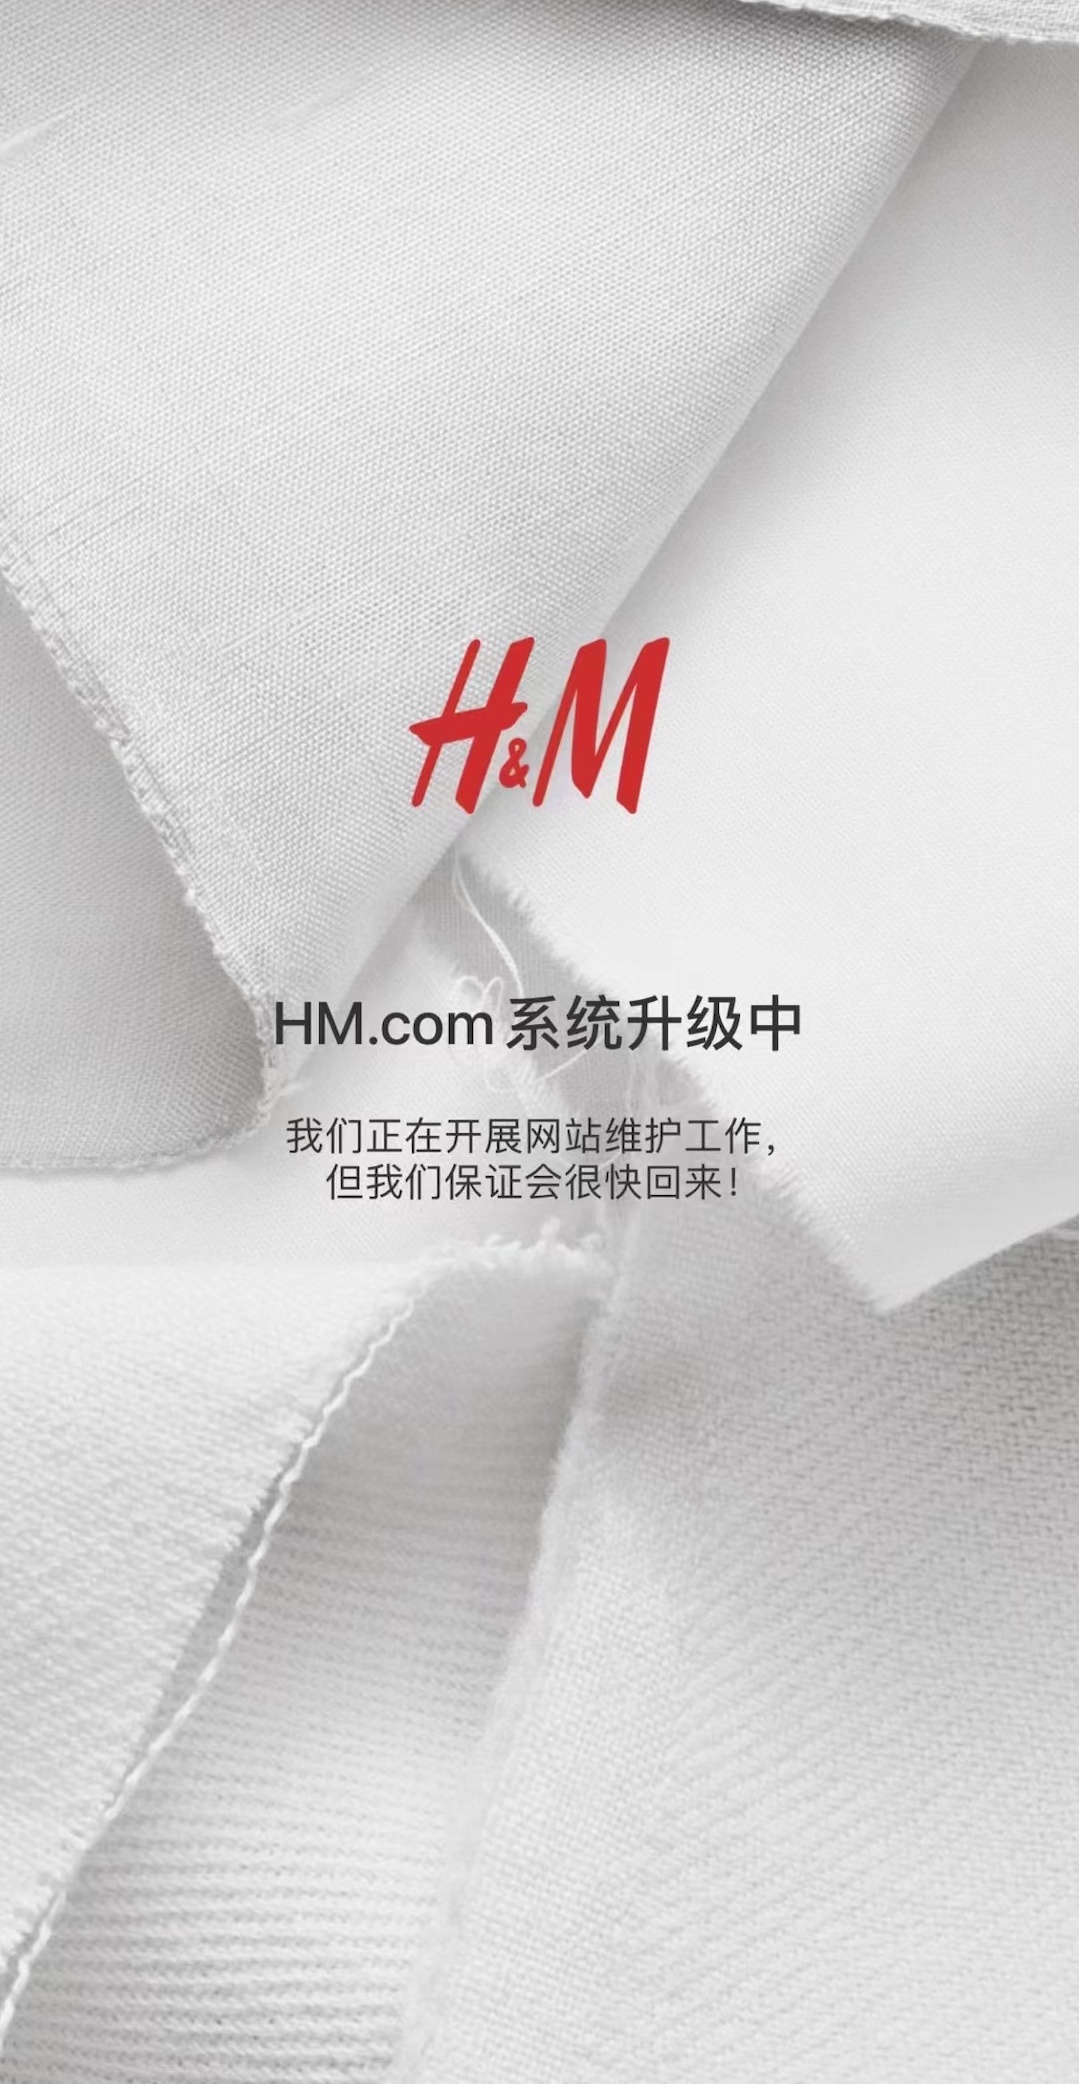  Website crash, store closure, "H&M x Mugler" co branded series being snapped